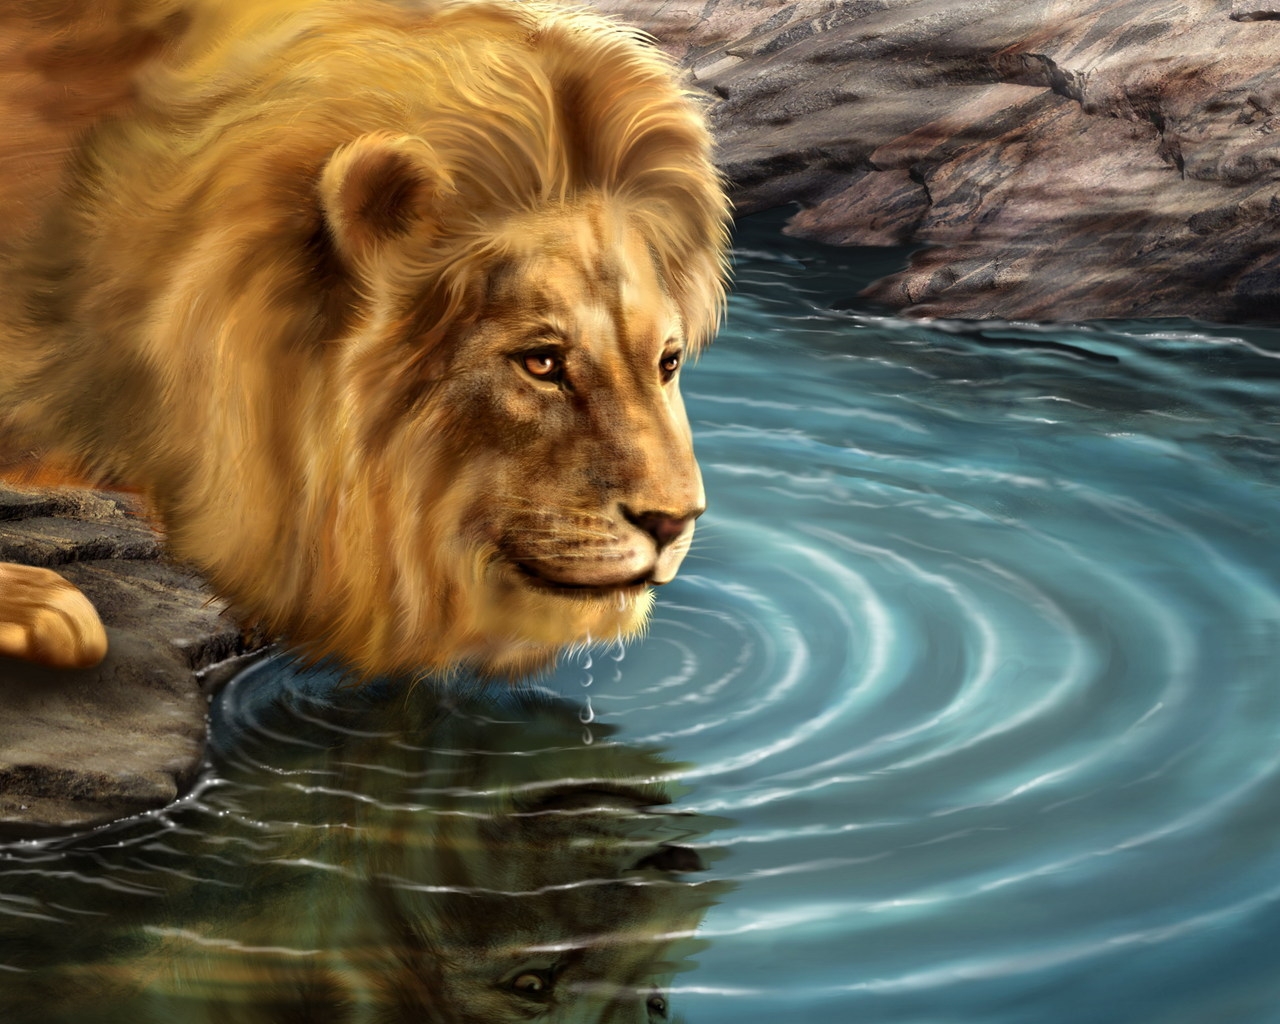 Lion Drinking Water for 1280 x 1024 resolution